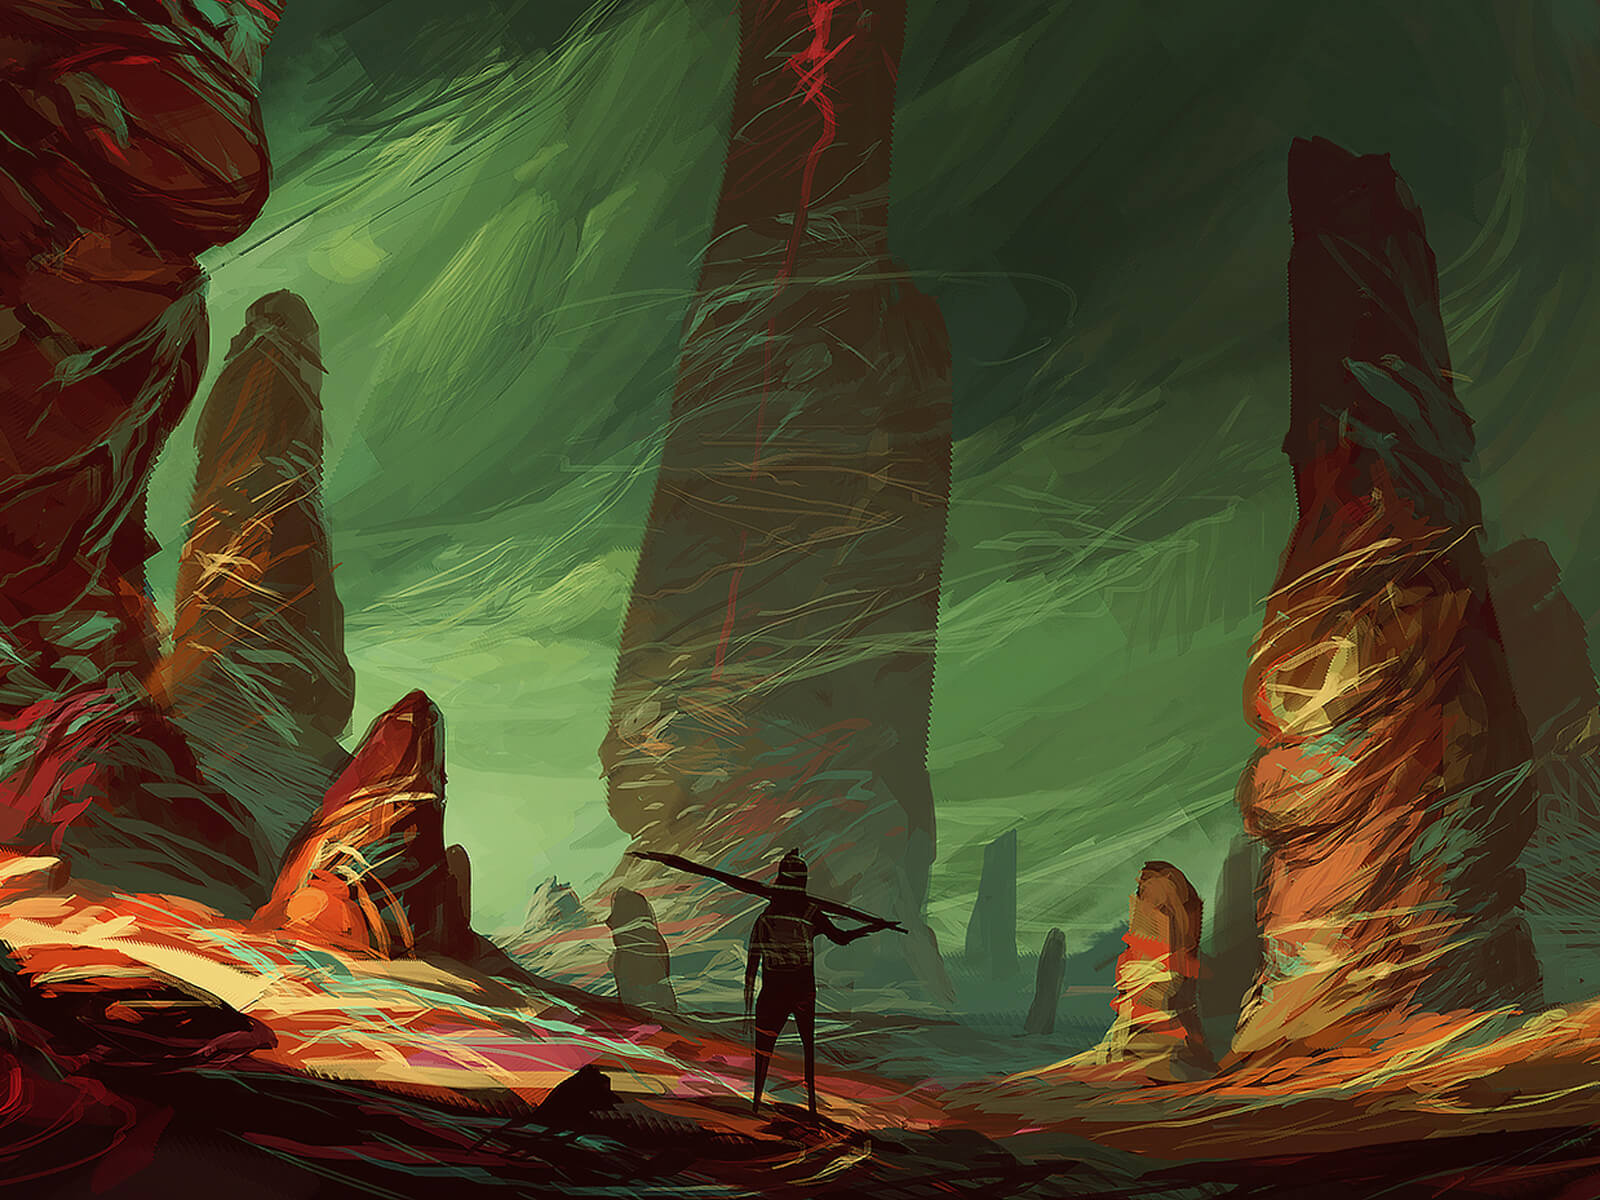 A rocky, alien environment with colorful outcroppings dwarf a humanoid figure standing with its back turned in the foreground